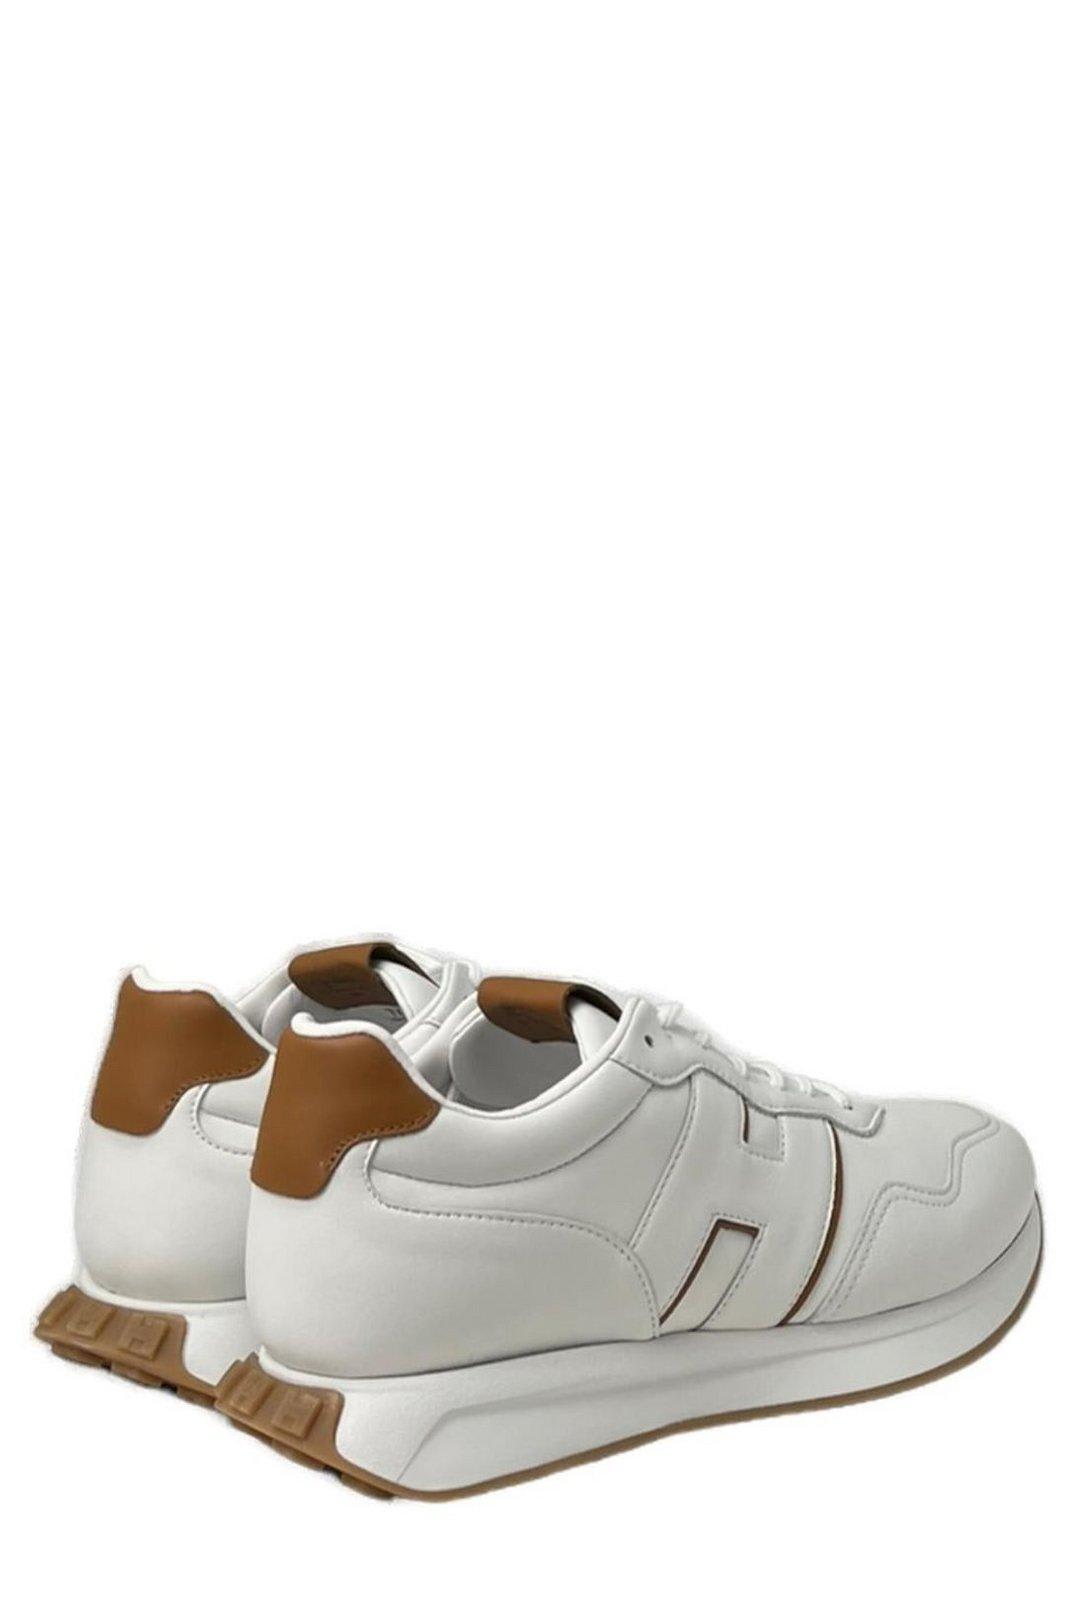 Shop Hogan H601 Lace-up Sneakers In White